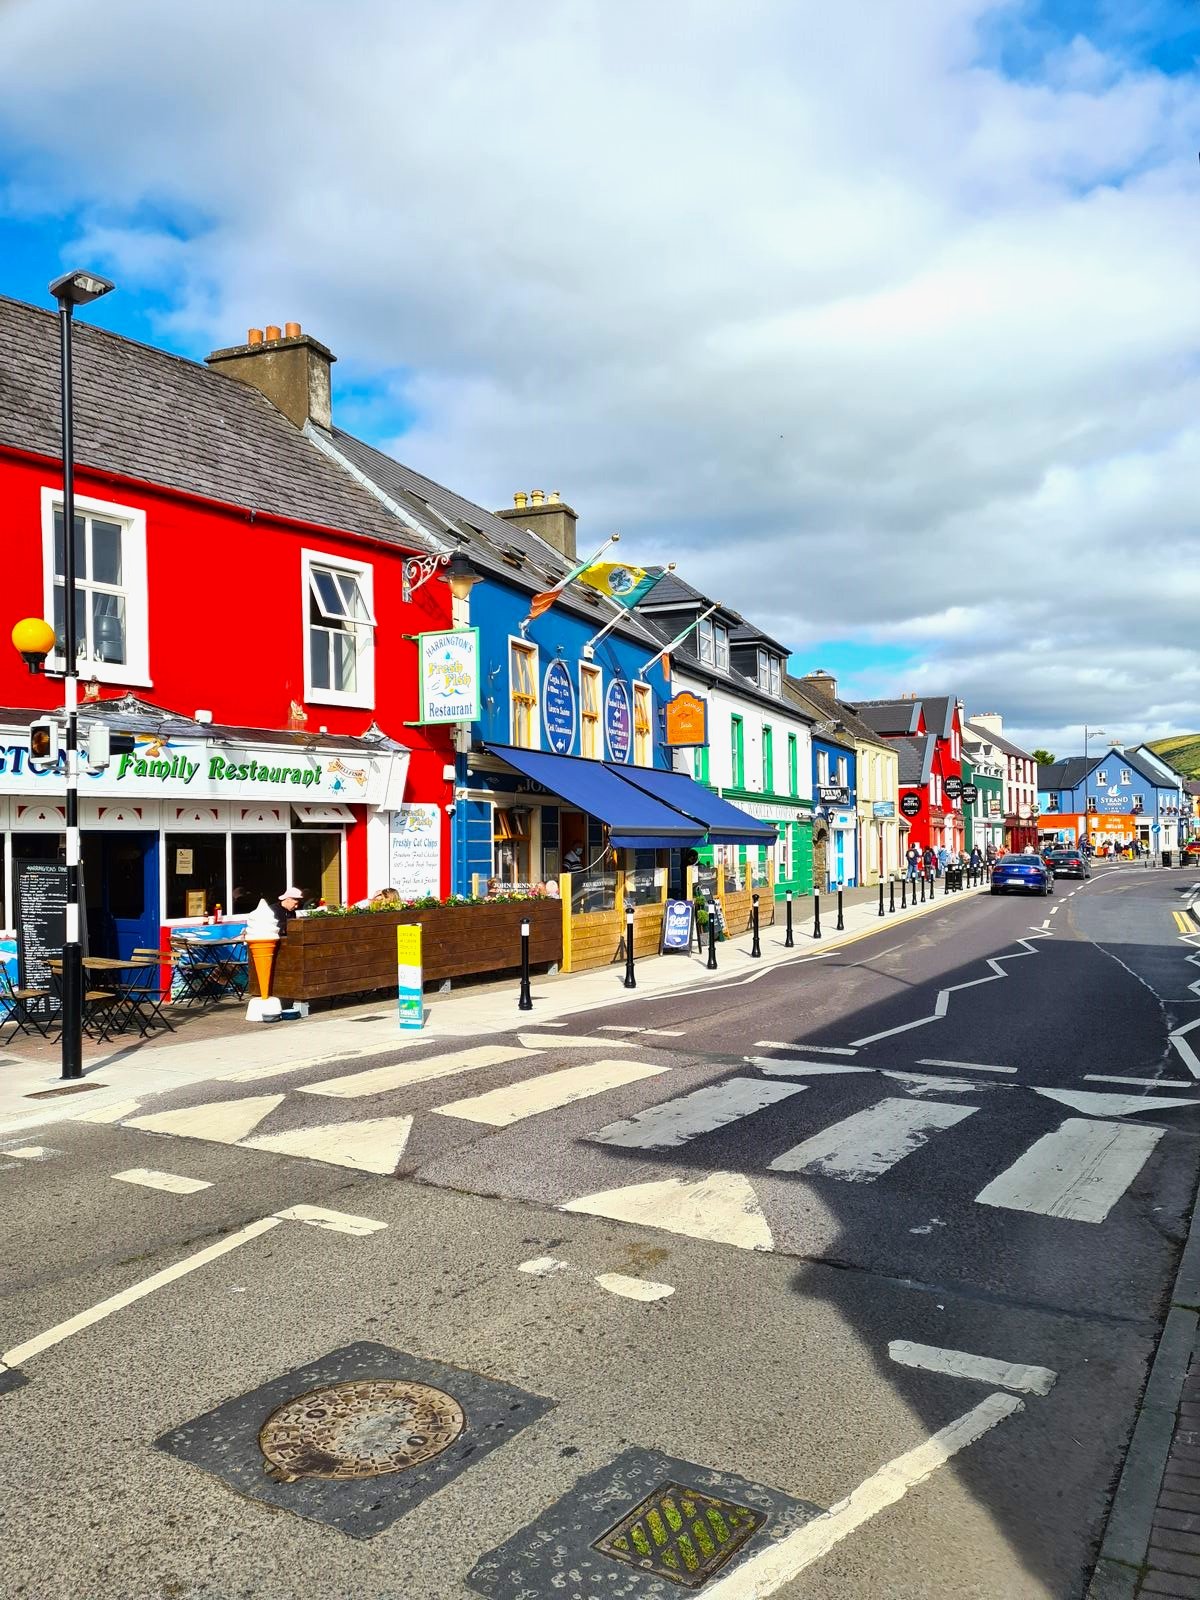  A cross walk in front of the colourful Dingle high street 